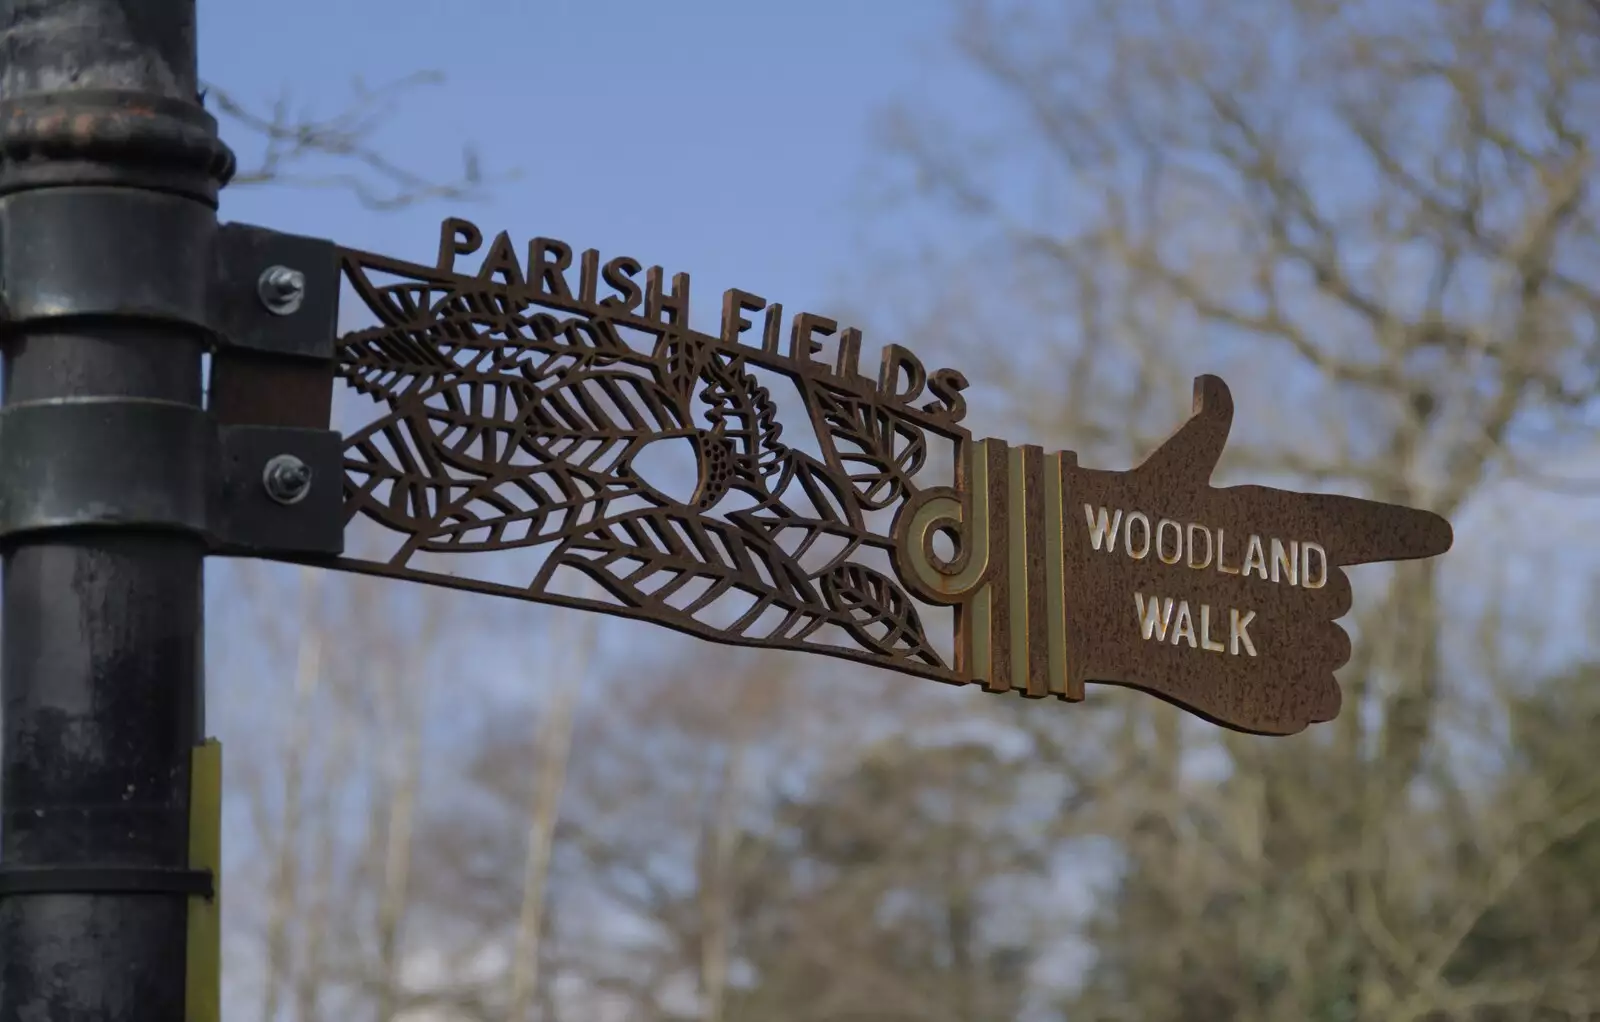 A sign for the Parish Fields woodland walk, from Palgrave Player's Wrap Party and a March Miscellany, Suffolk - 6th March 2024